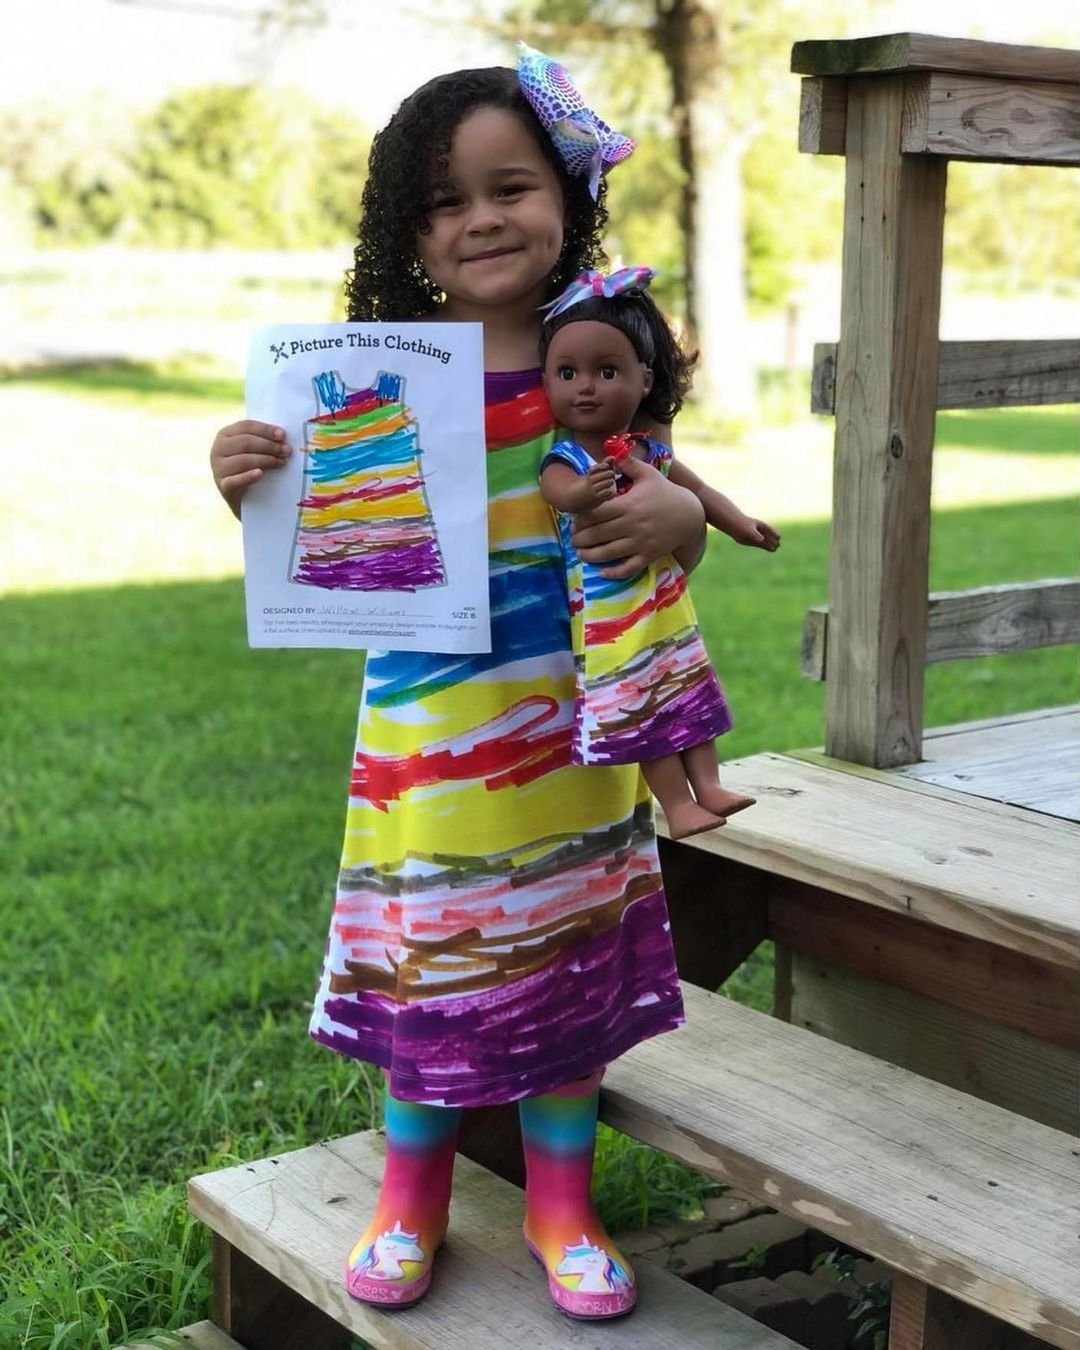 Adorable little girl holding a paper with dress design, wearing the design she drew, and also holding a doll with a matching dress.